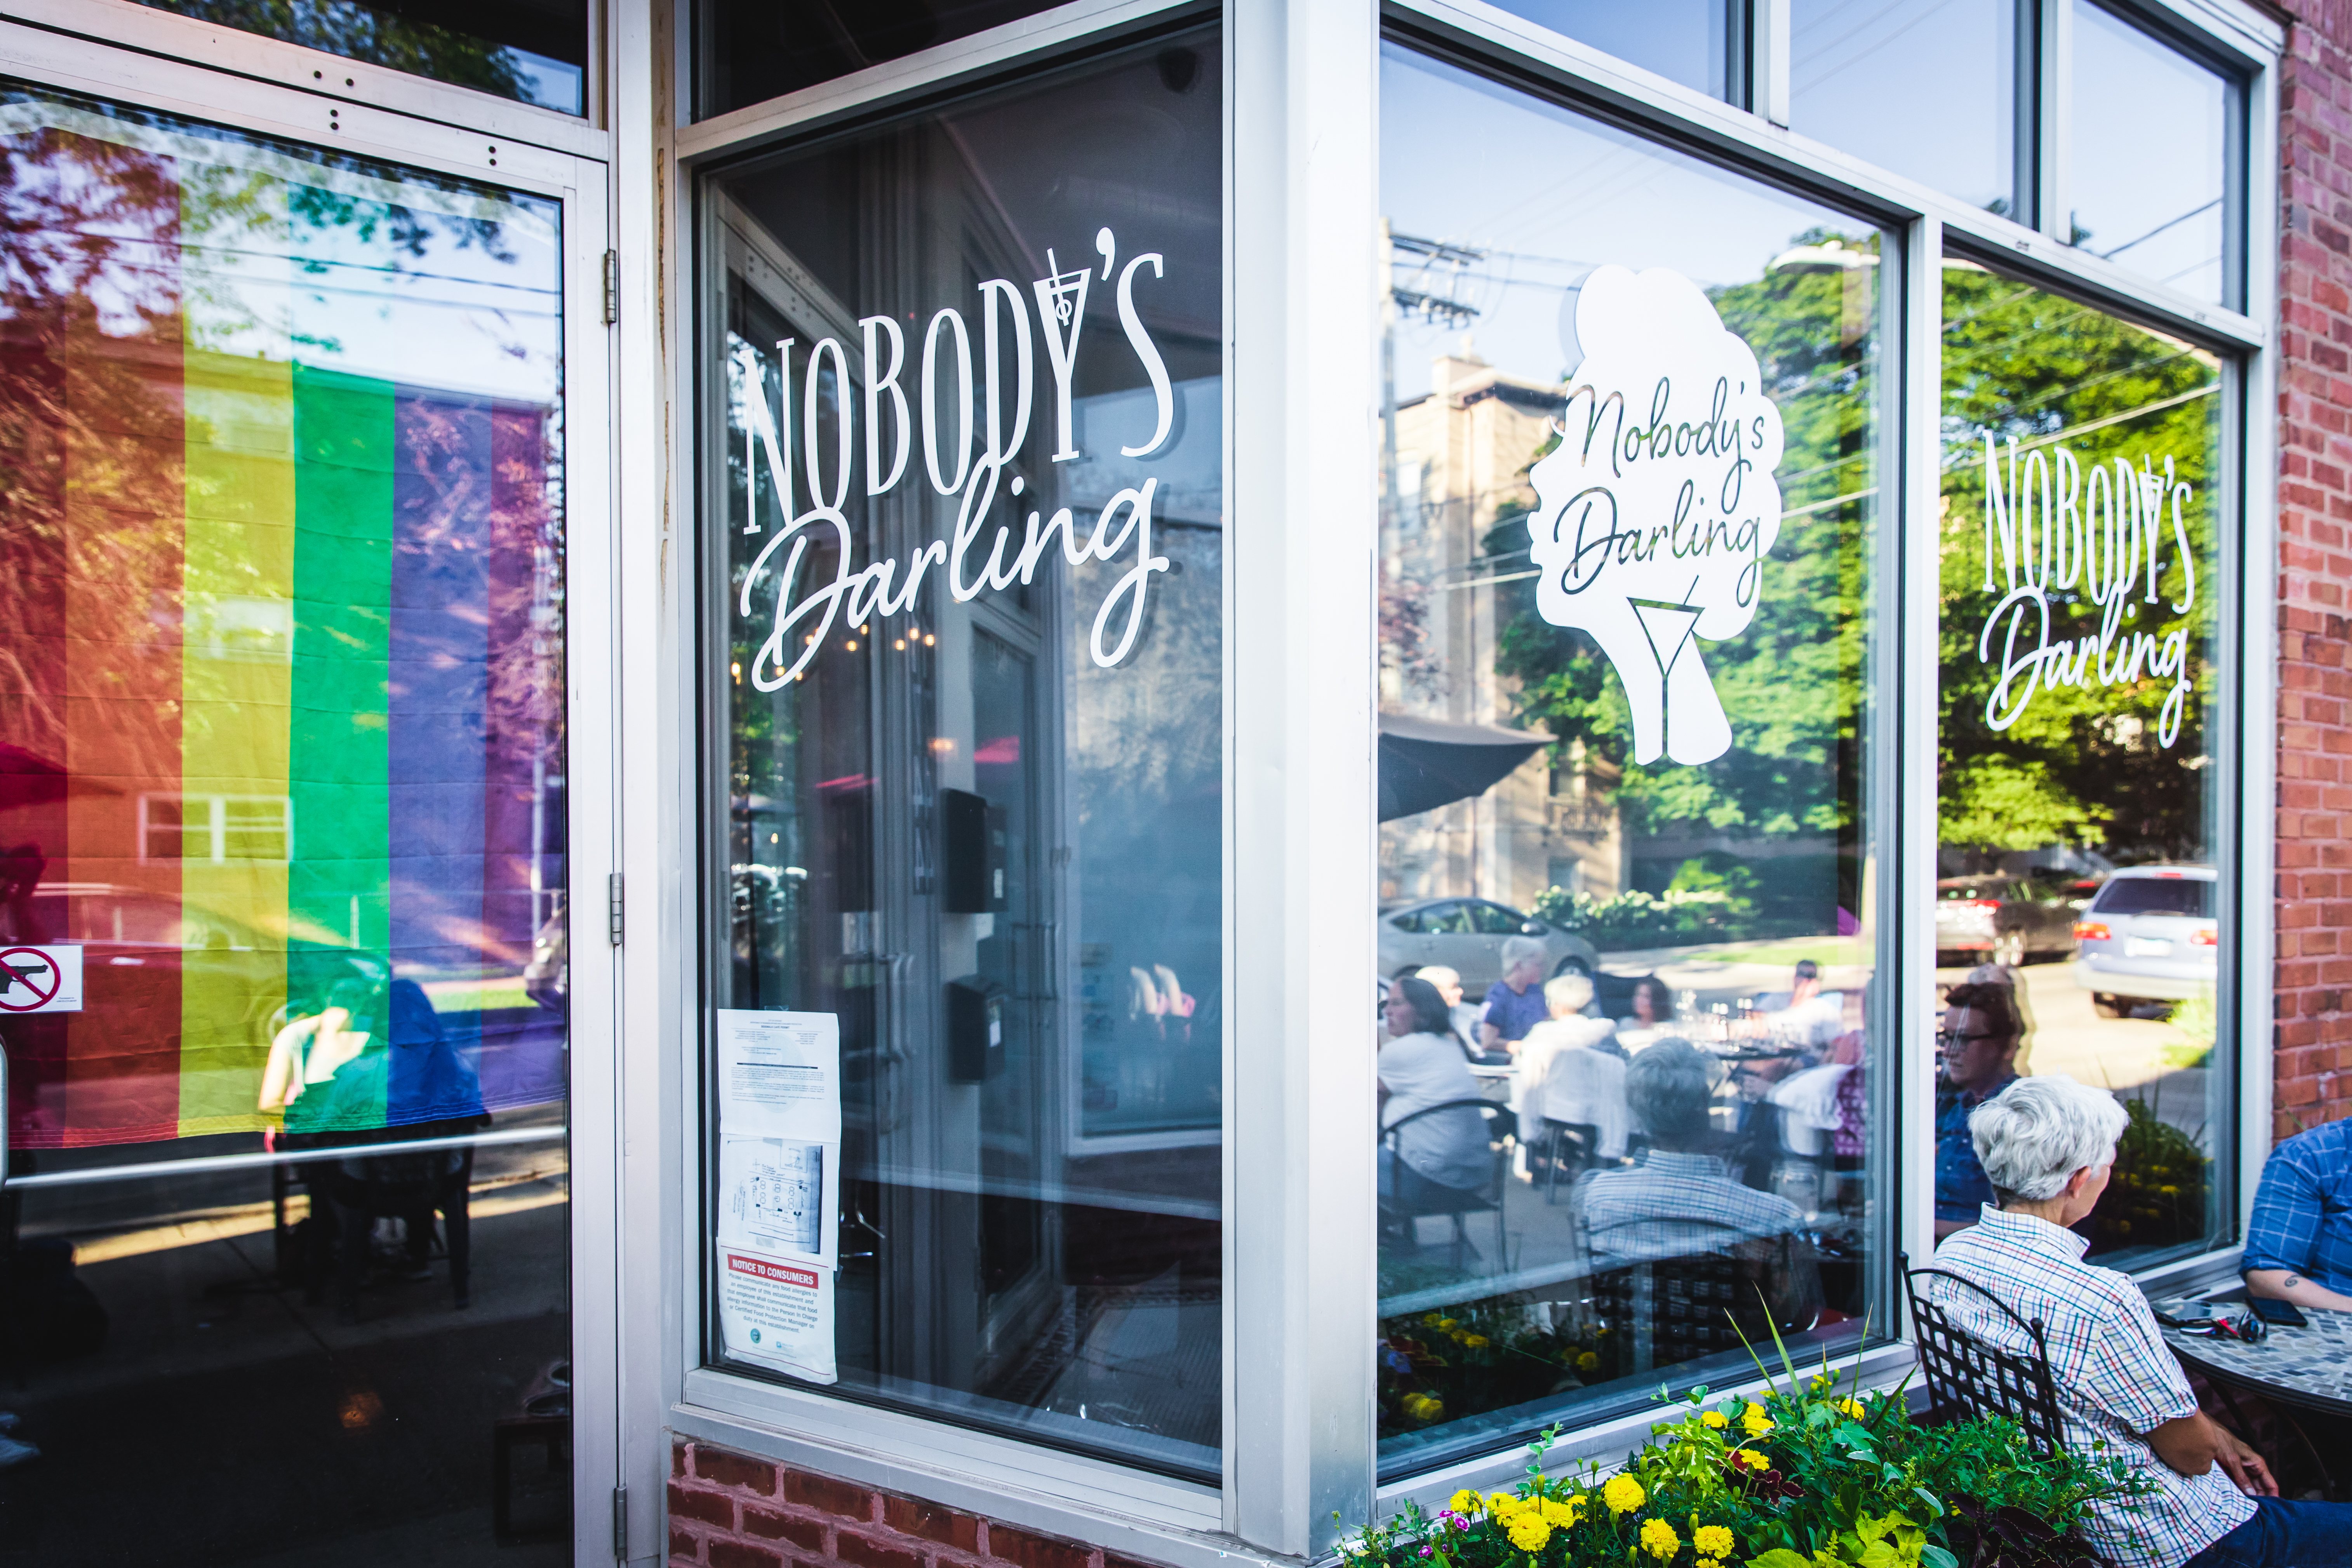 A bar entrance from the outside with signs that read “Nobody’s Darling.”